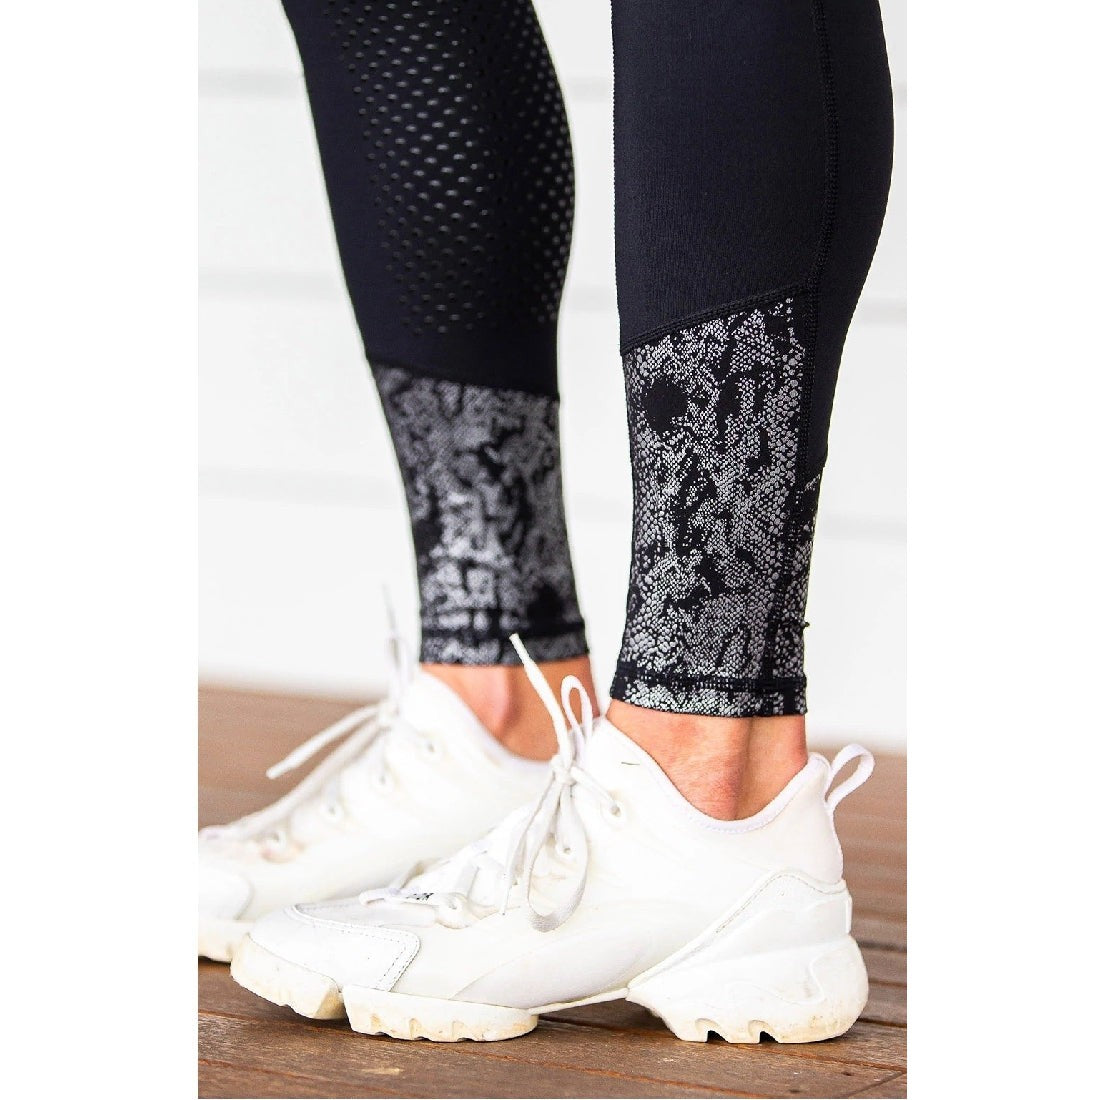 Person wearing black horse riding tights with lace detail and white sneakers.